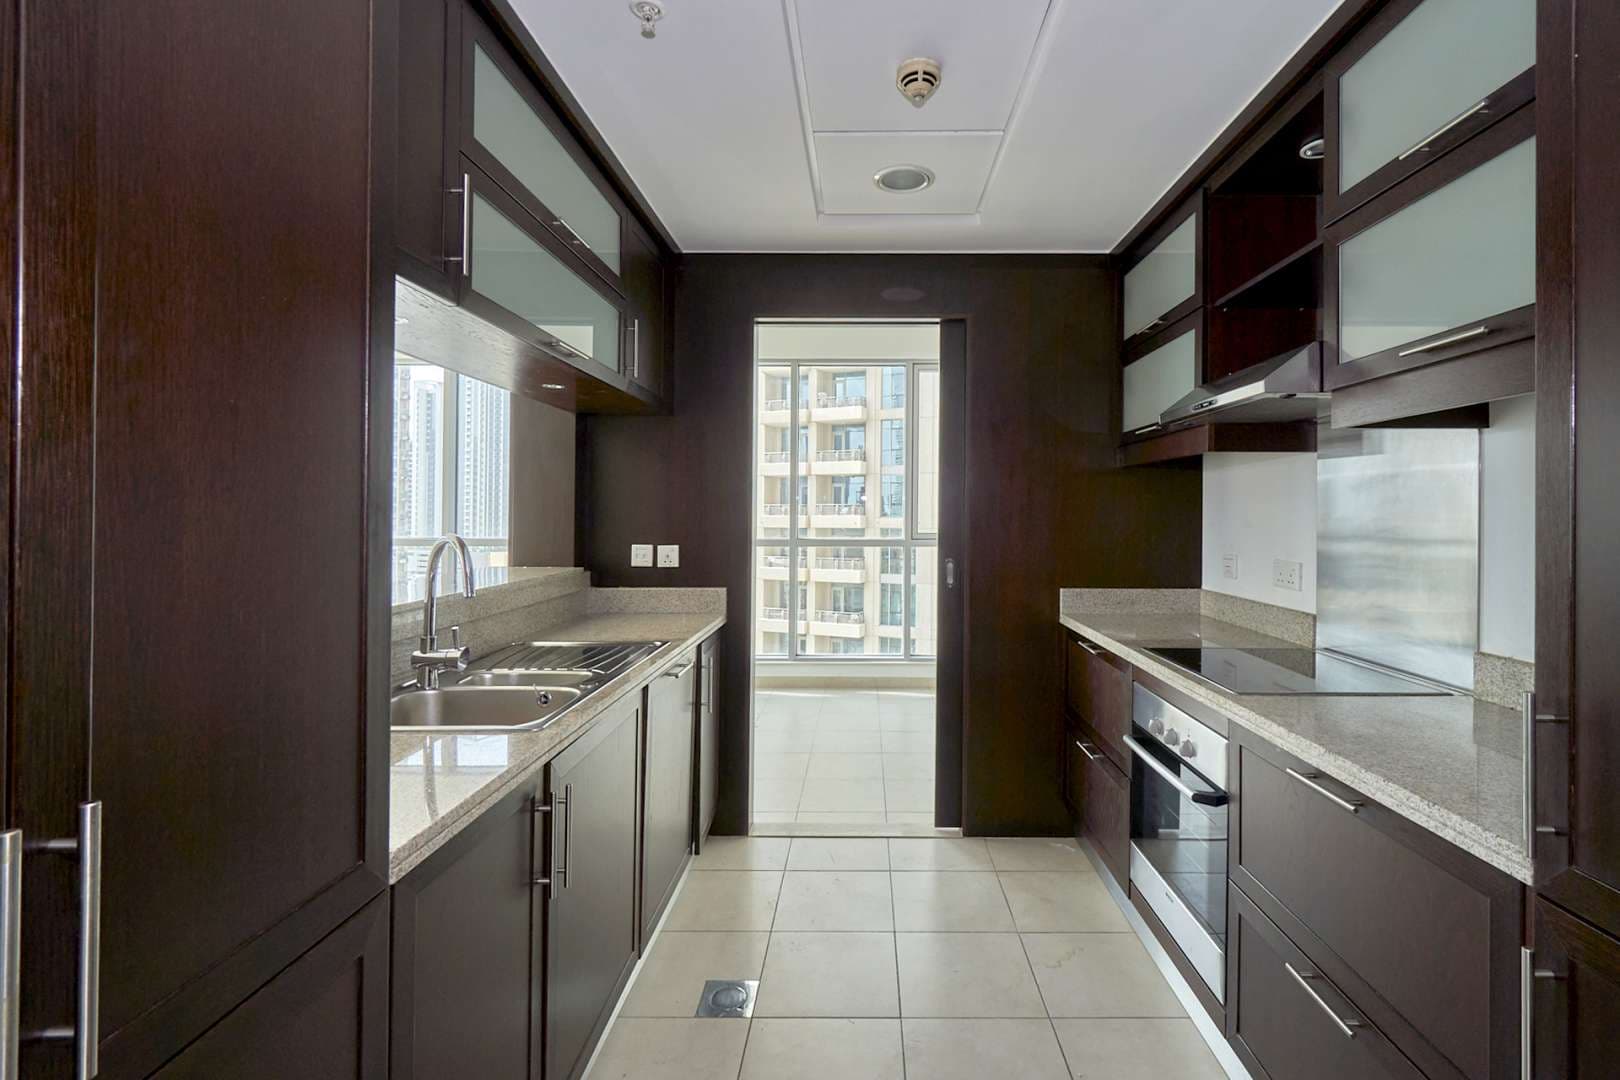 1 Bedroom Apartment For Rent The Residences Lp09118 5f8690ee64661c0.jpg